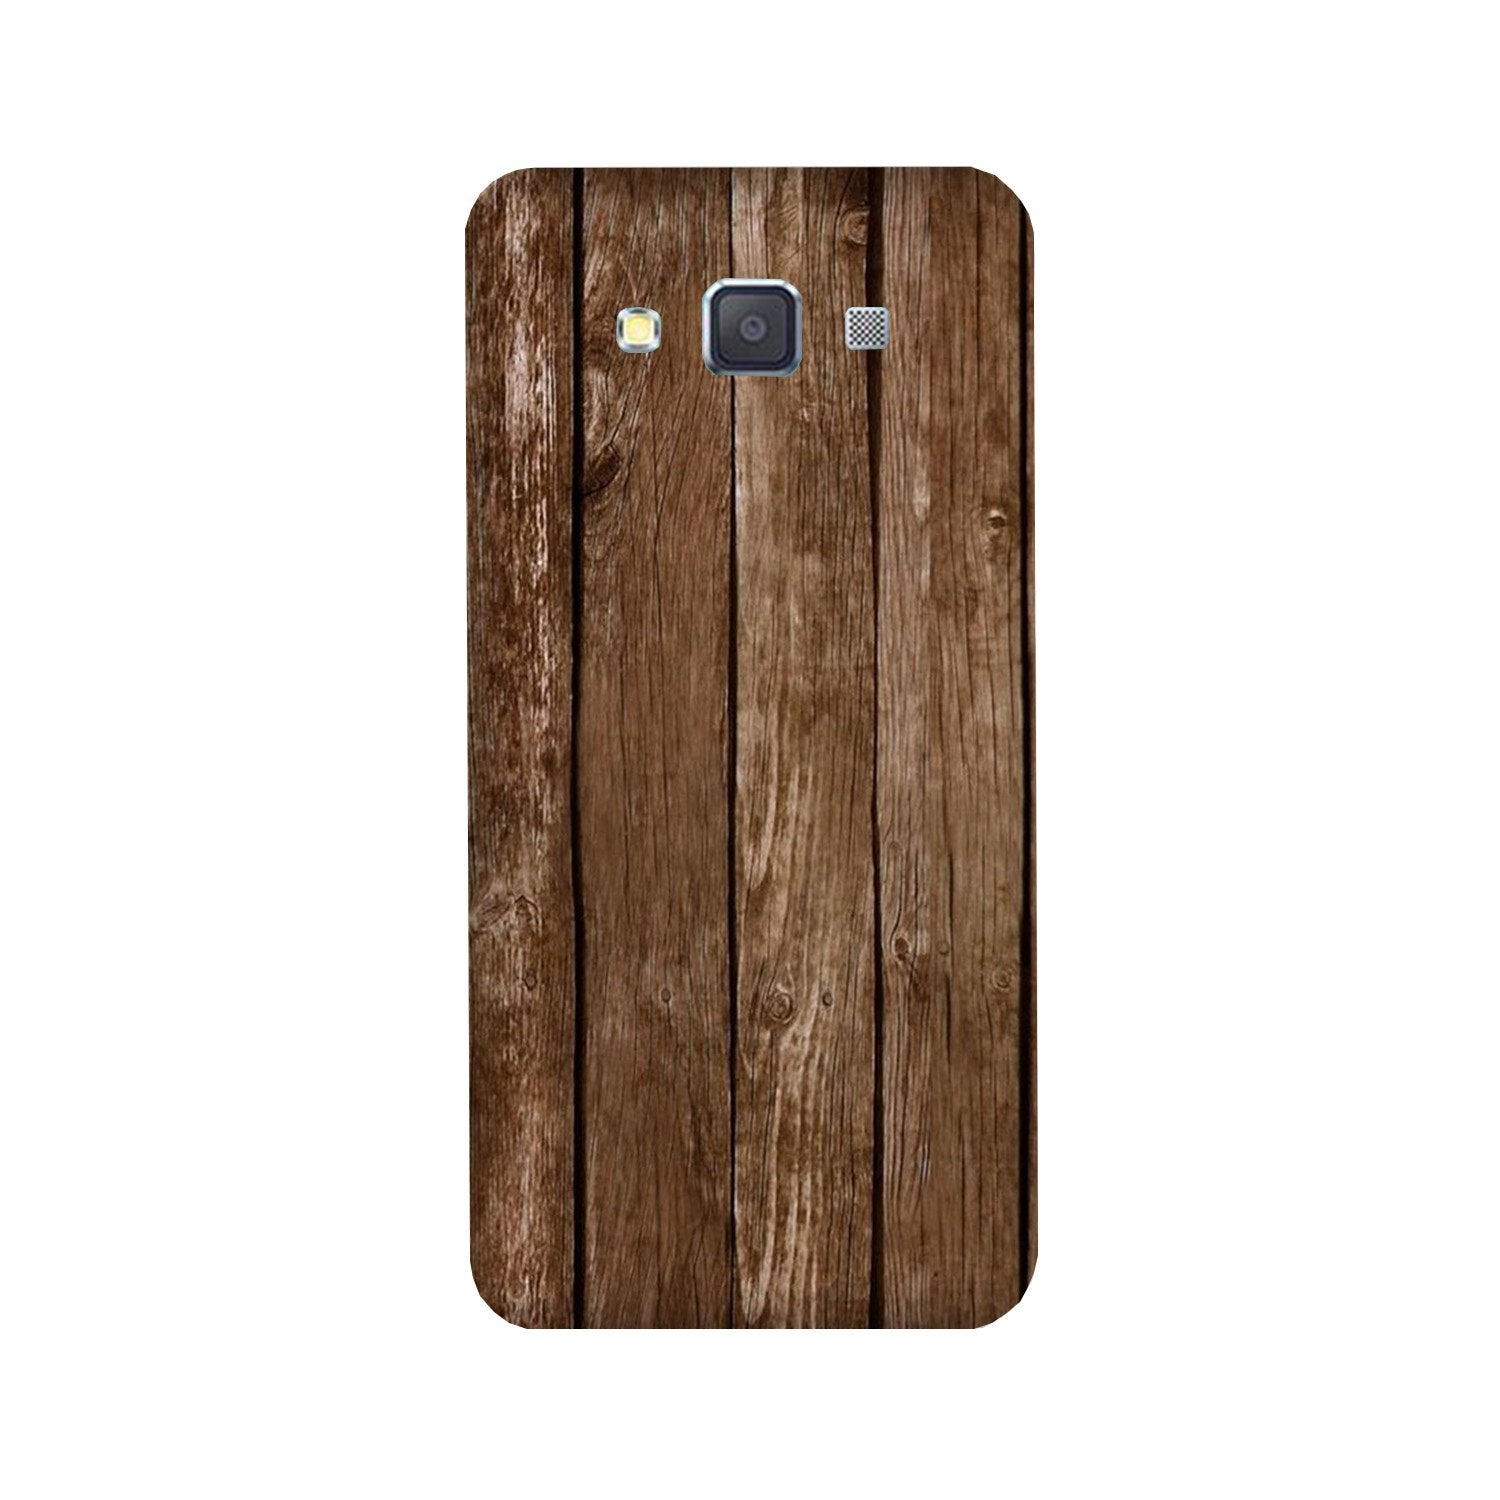 Wooden Look Case for Galaxy Grand 2(Design - 112)